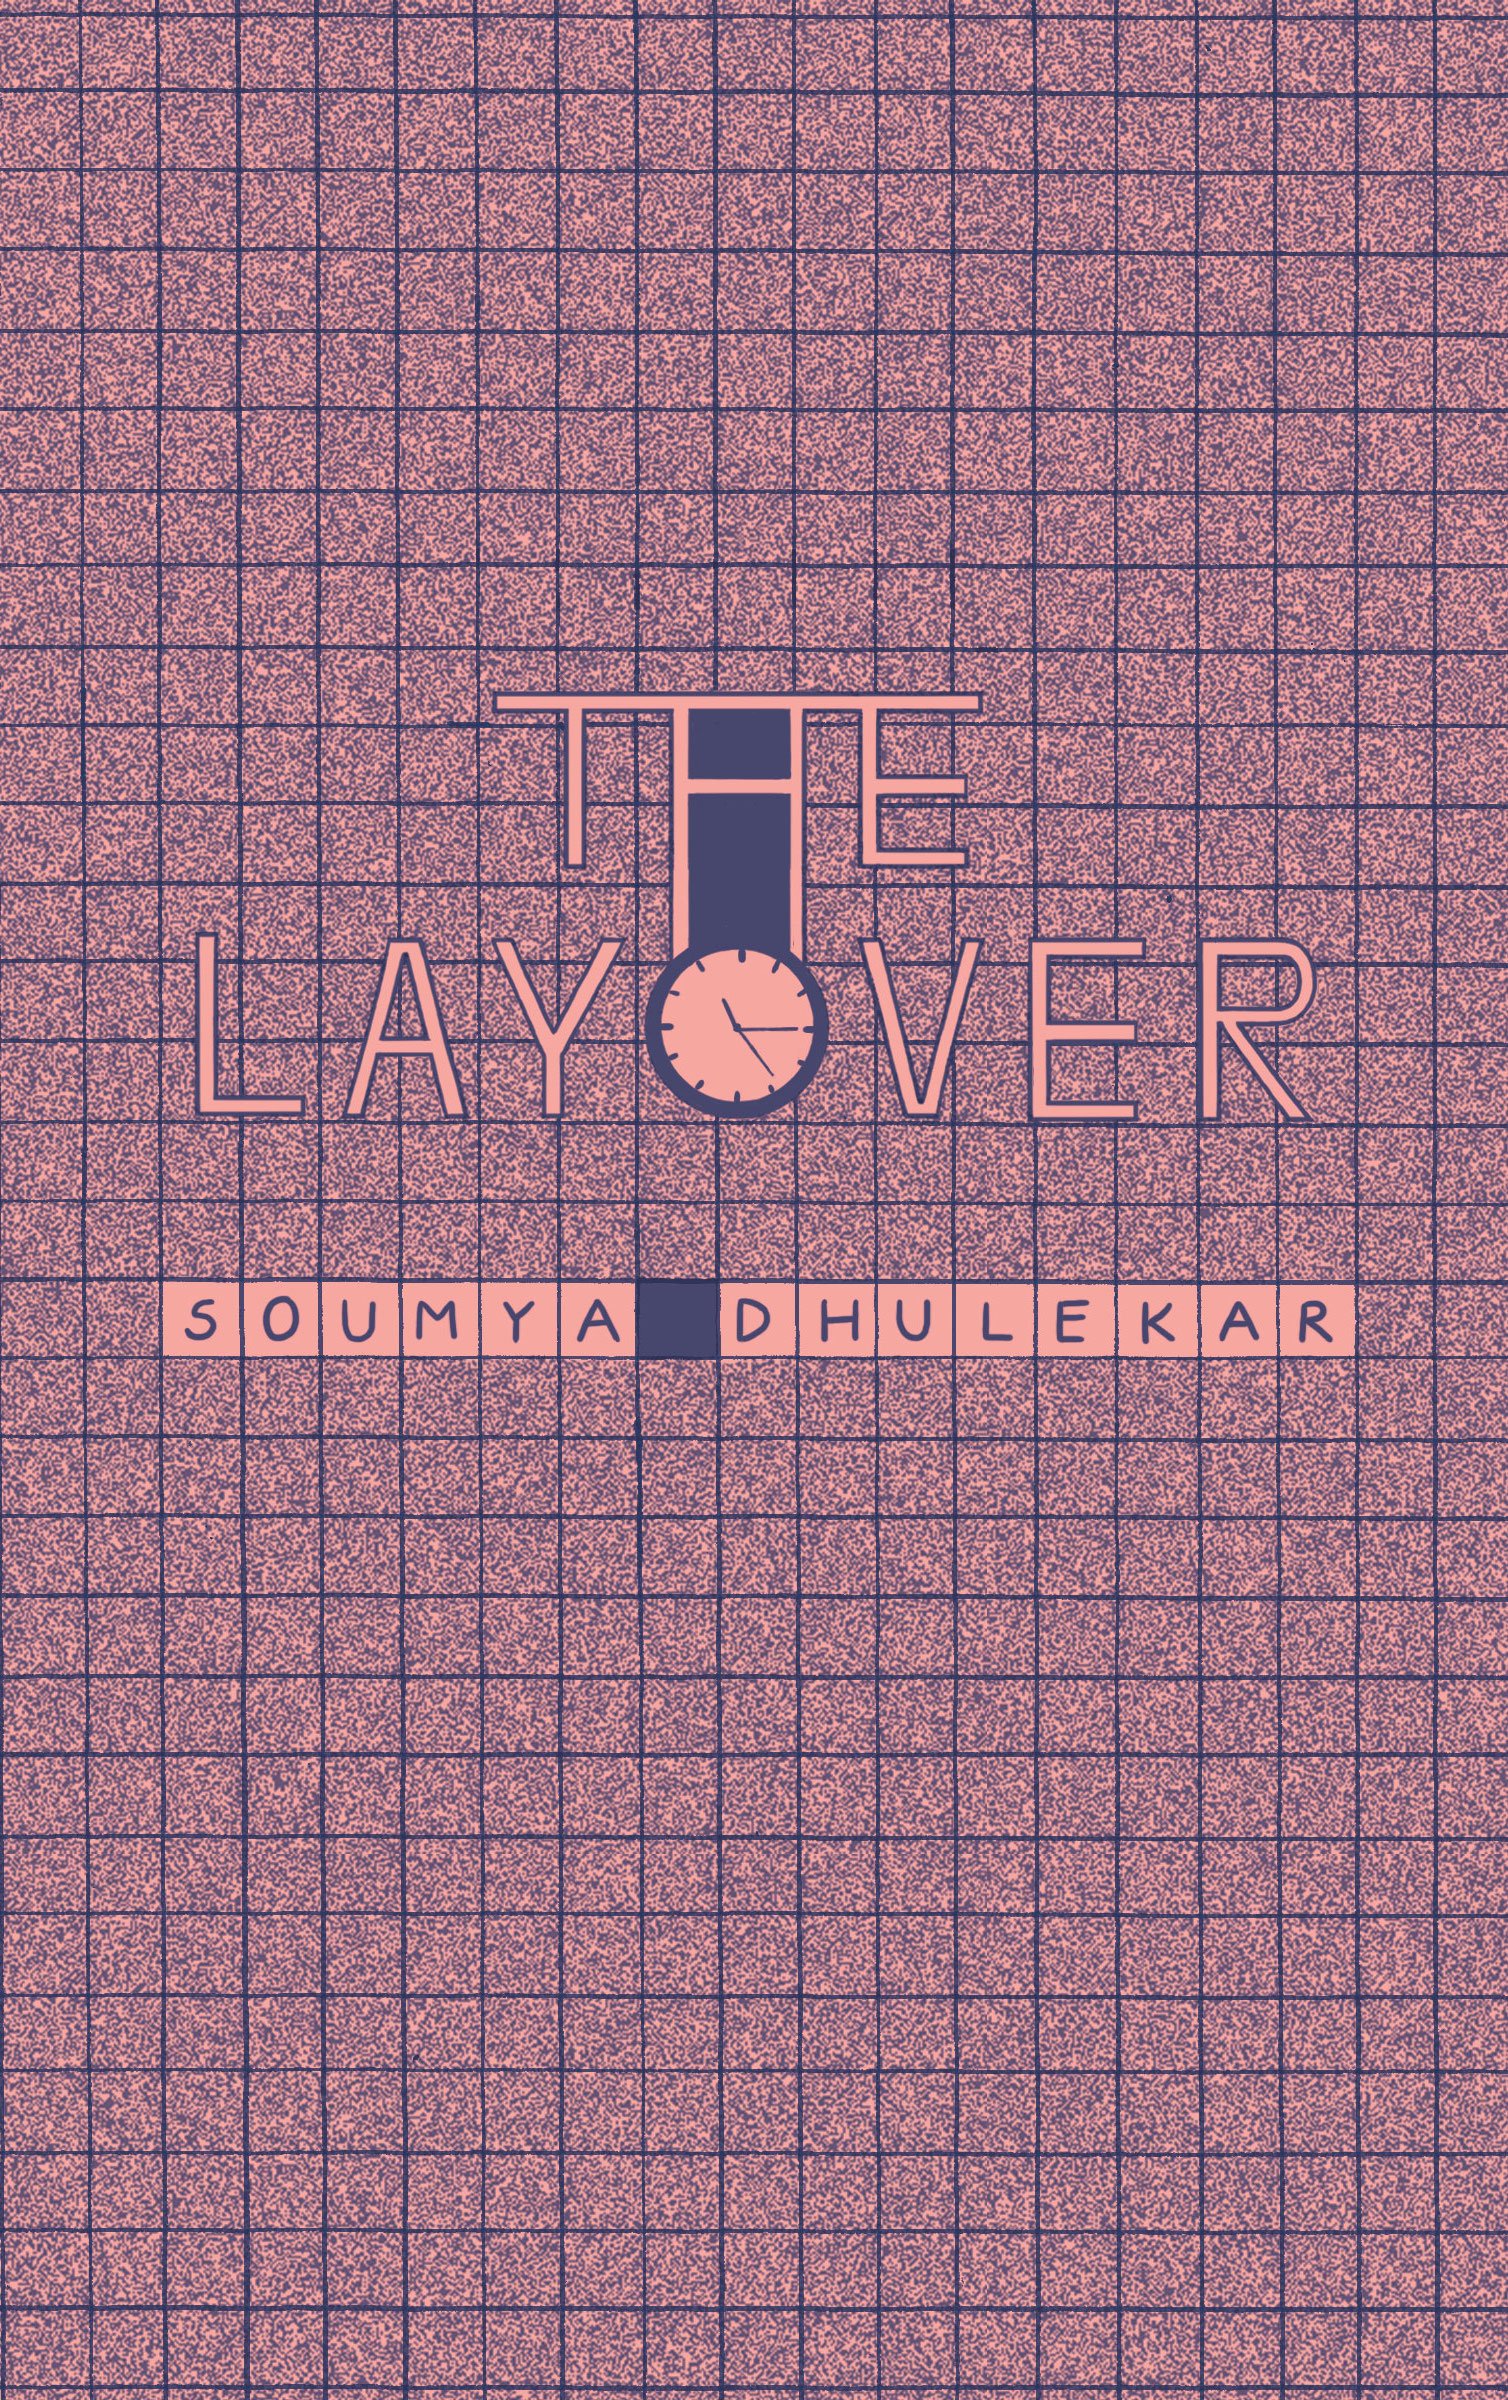 The Layover. 16 pages, 5 x 8 in, 2-color risograph printed, 2019.